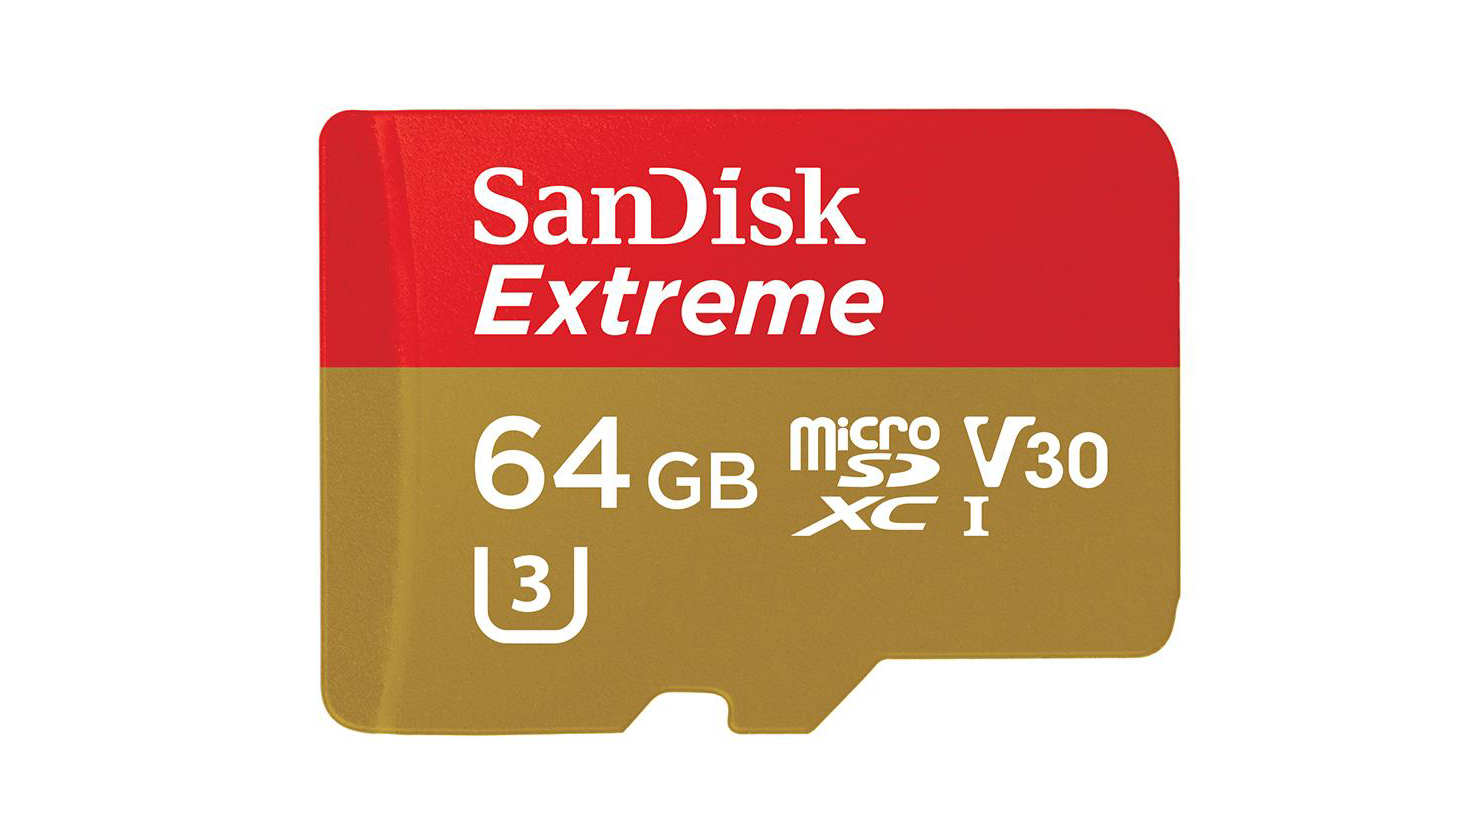 Best GoPro accessories: SanDisk Extreme 64GB microSDXC Memory Card